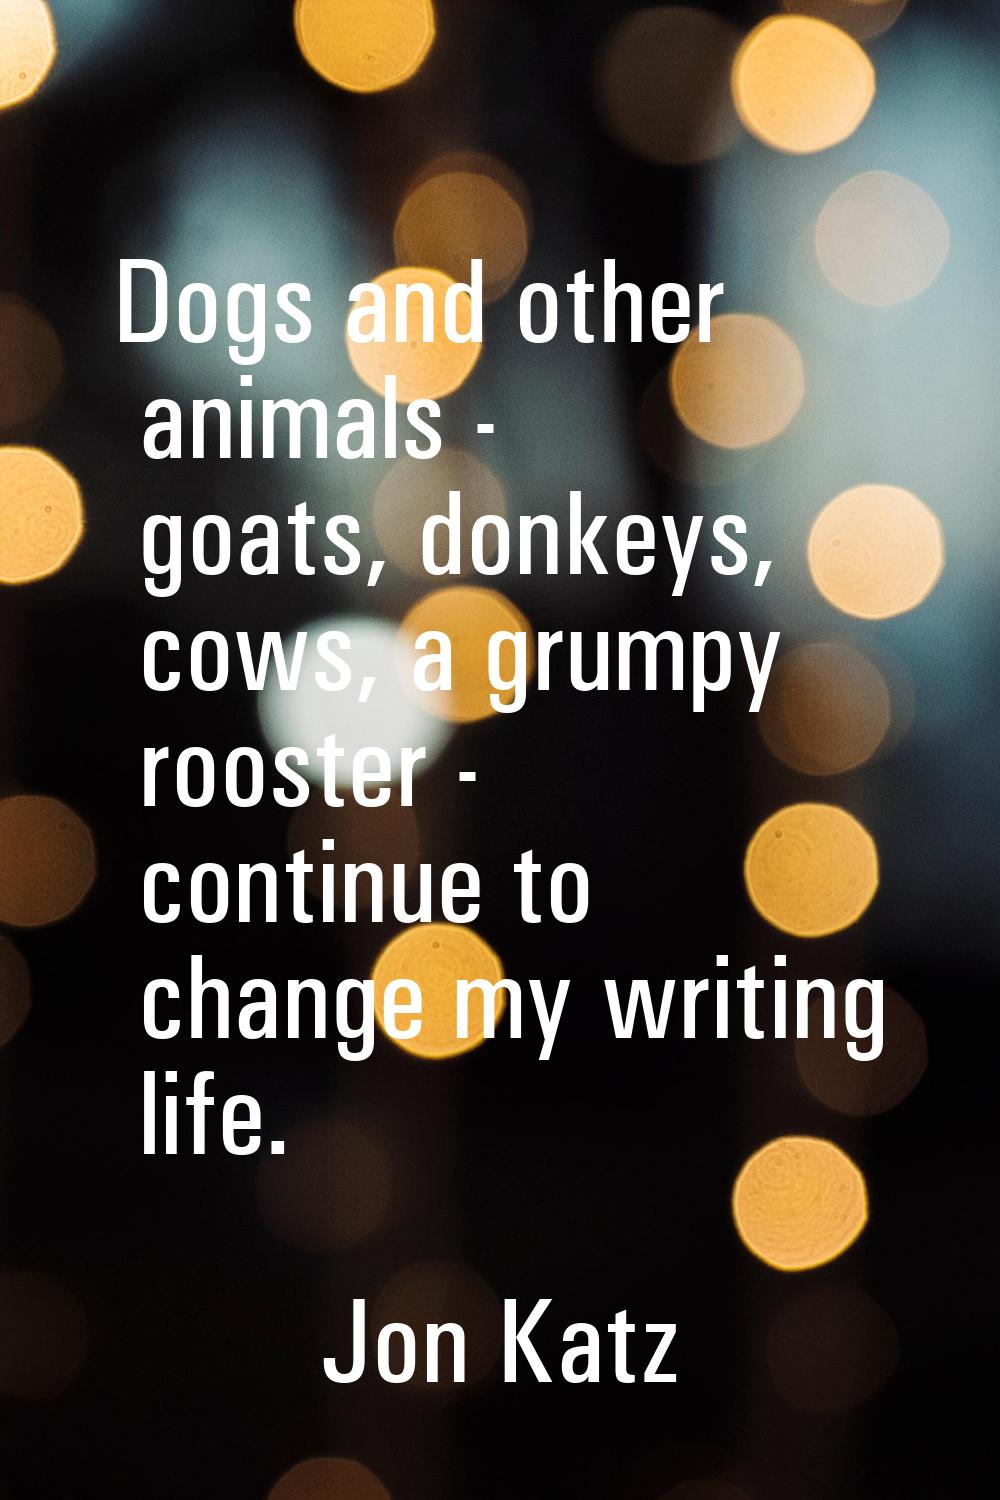 Dogs and other animals - goats, donkeys, cows, a grumpy rooster - continue to change my writing lif